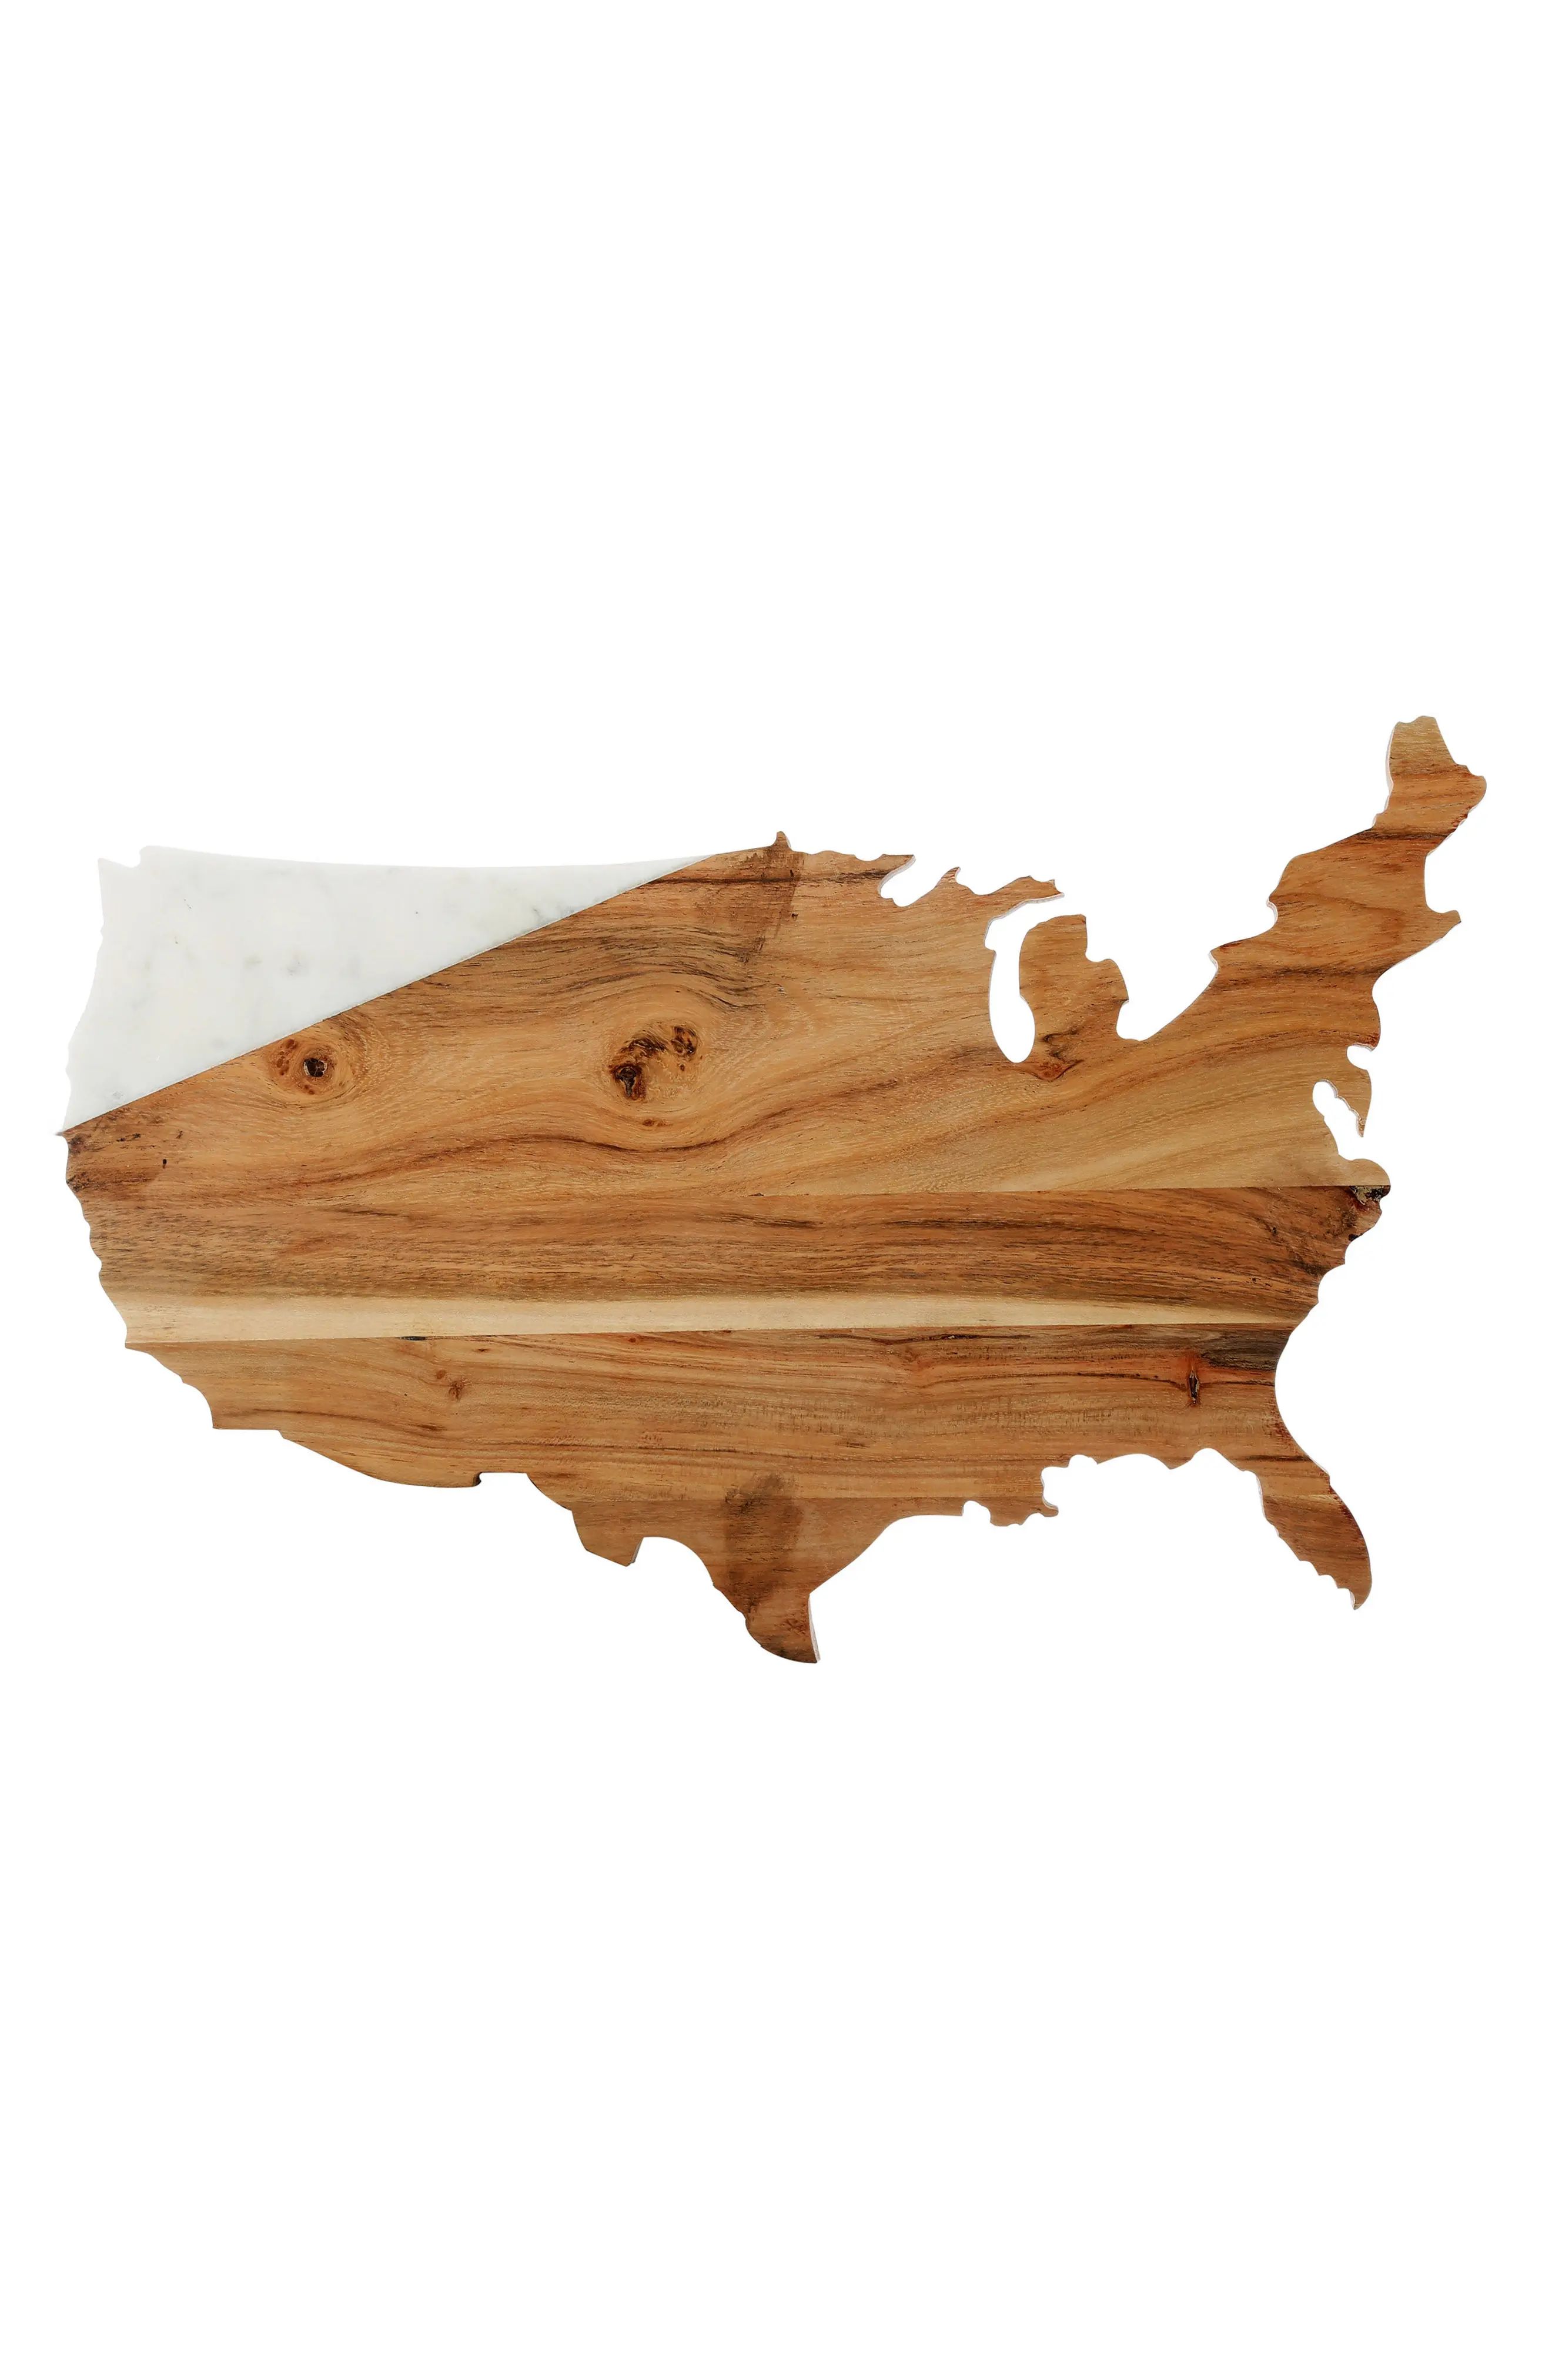 USA Marble & Wood Serving Board | Nordstrom